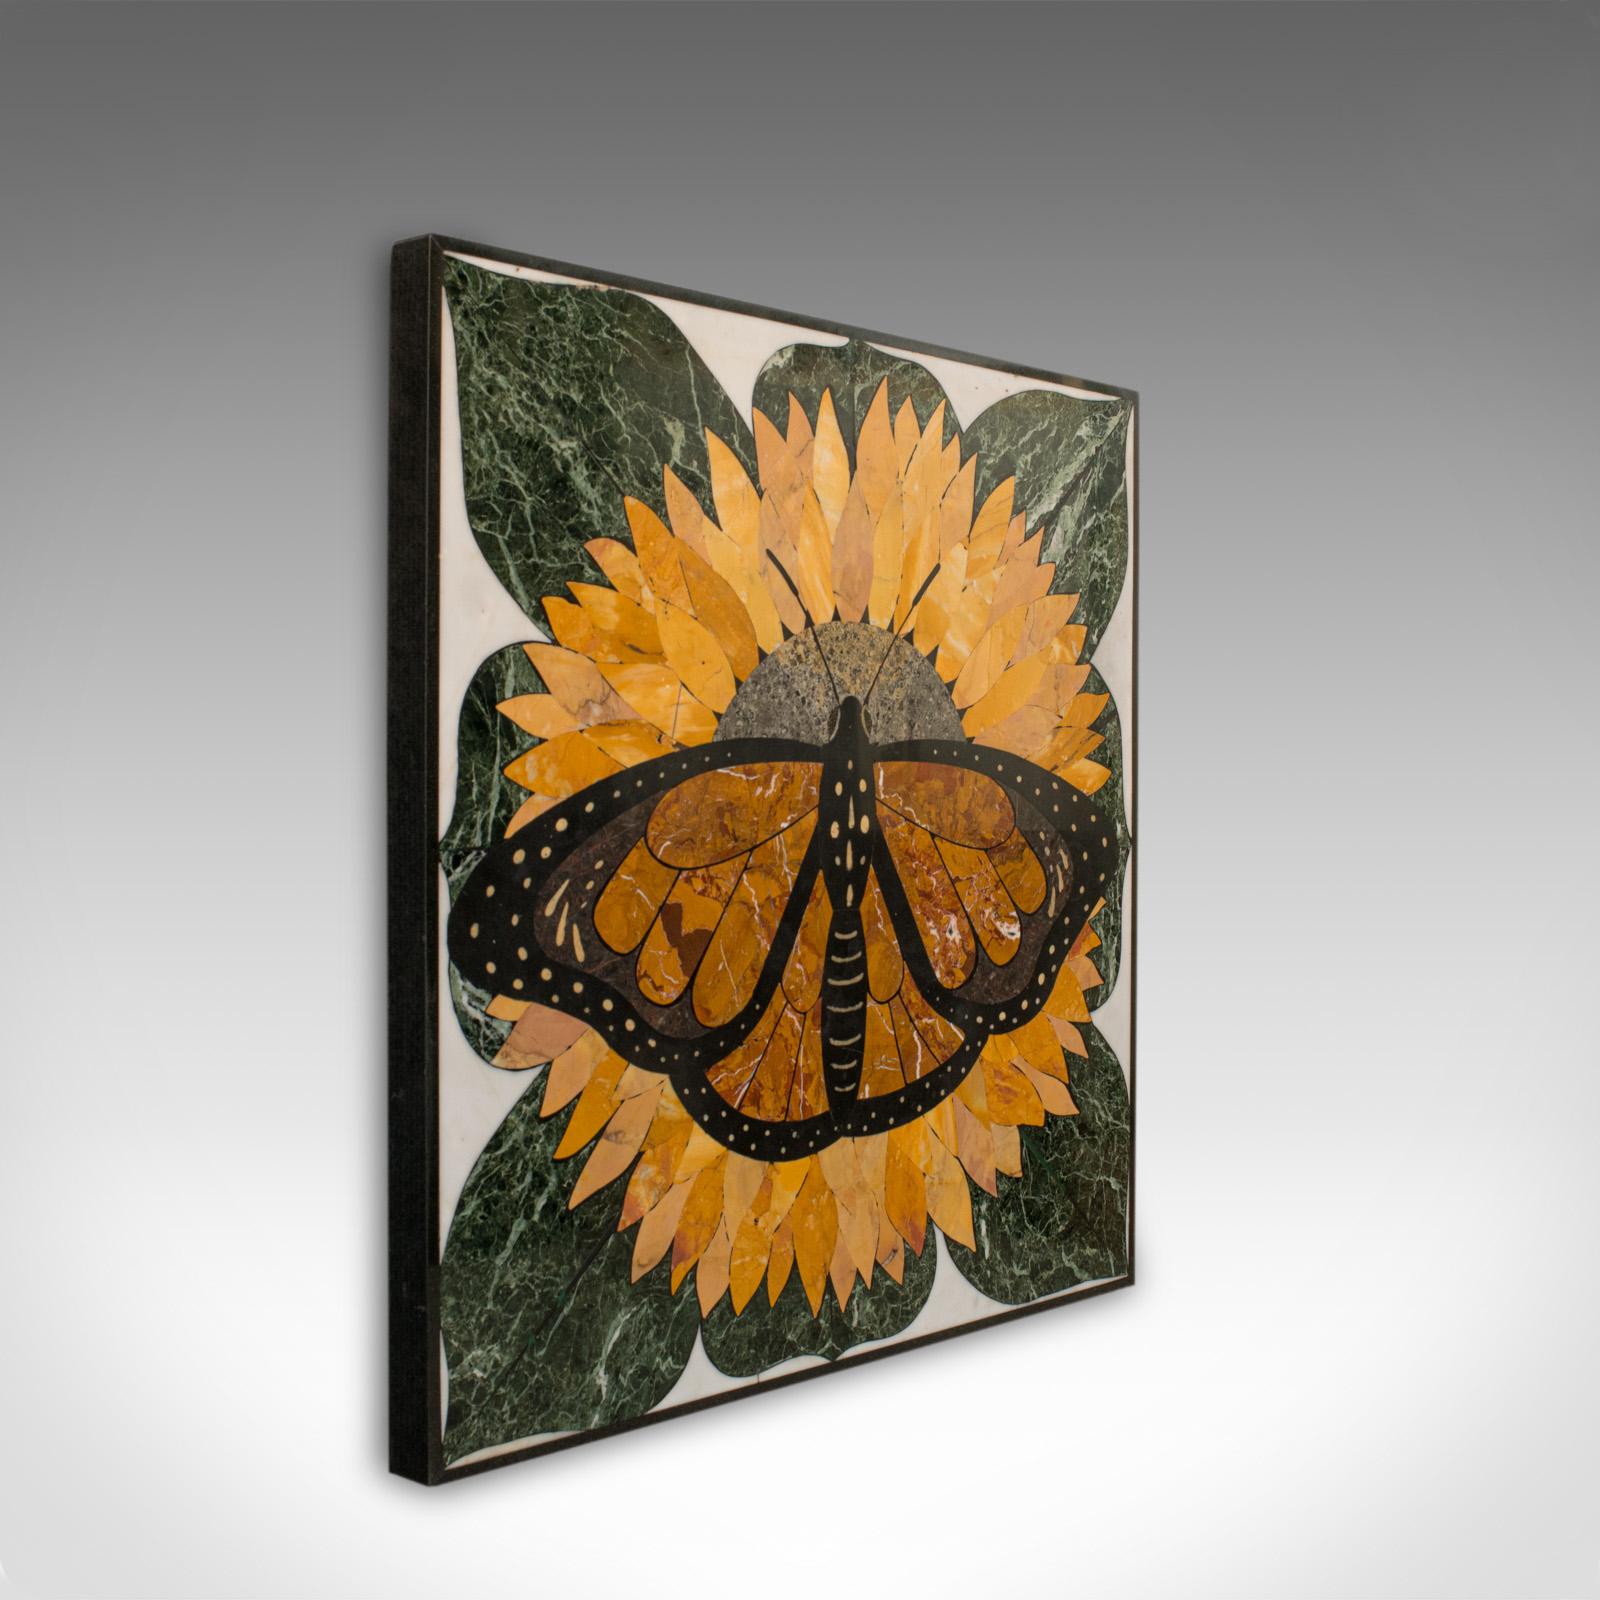 'Monarch' is a vintage butterfly Pietra Dura. An English, decorative wall mounted or table top piece by the renowned sculptural artist, Dominic Hurley.

A one-of-a-kind vintage work in very good order throughout
Beautifully arranged stone